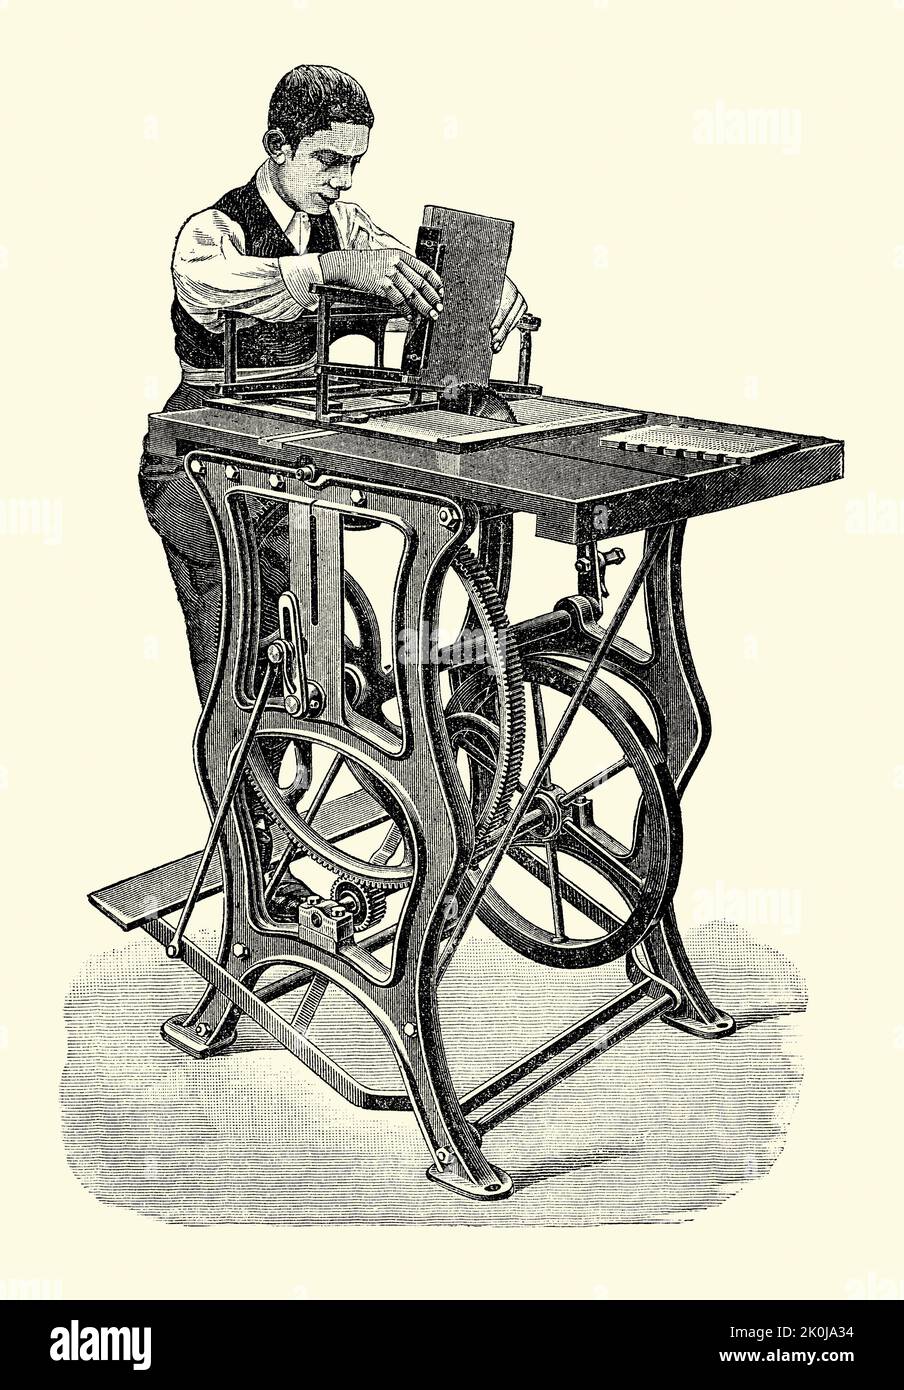 An old Victorian engraving of a table saw with a Britannia dove-tailing device. It is from a book of 1890. In 1890 the first ever dovetailing machine was patented by the Britannia Company, Colchester, Essex, England, UK in 1890. The dovetailing jig or frame is used to make shallow, angled cuts in conjunction with a foot-powered saw – here it is being pedalled by the woodworker. A dovetail joint (or simply dovetail) is a joinery technique most commonly used in woodworking joinery/carpentry, mainly in furniture. Stock Photo